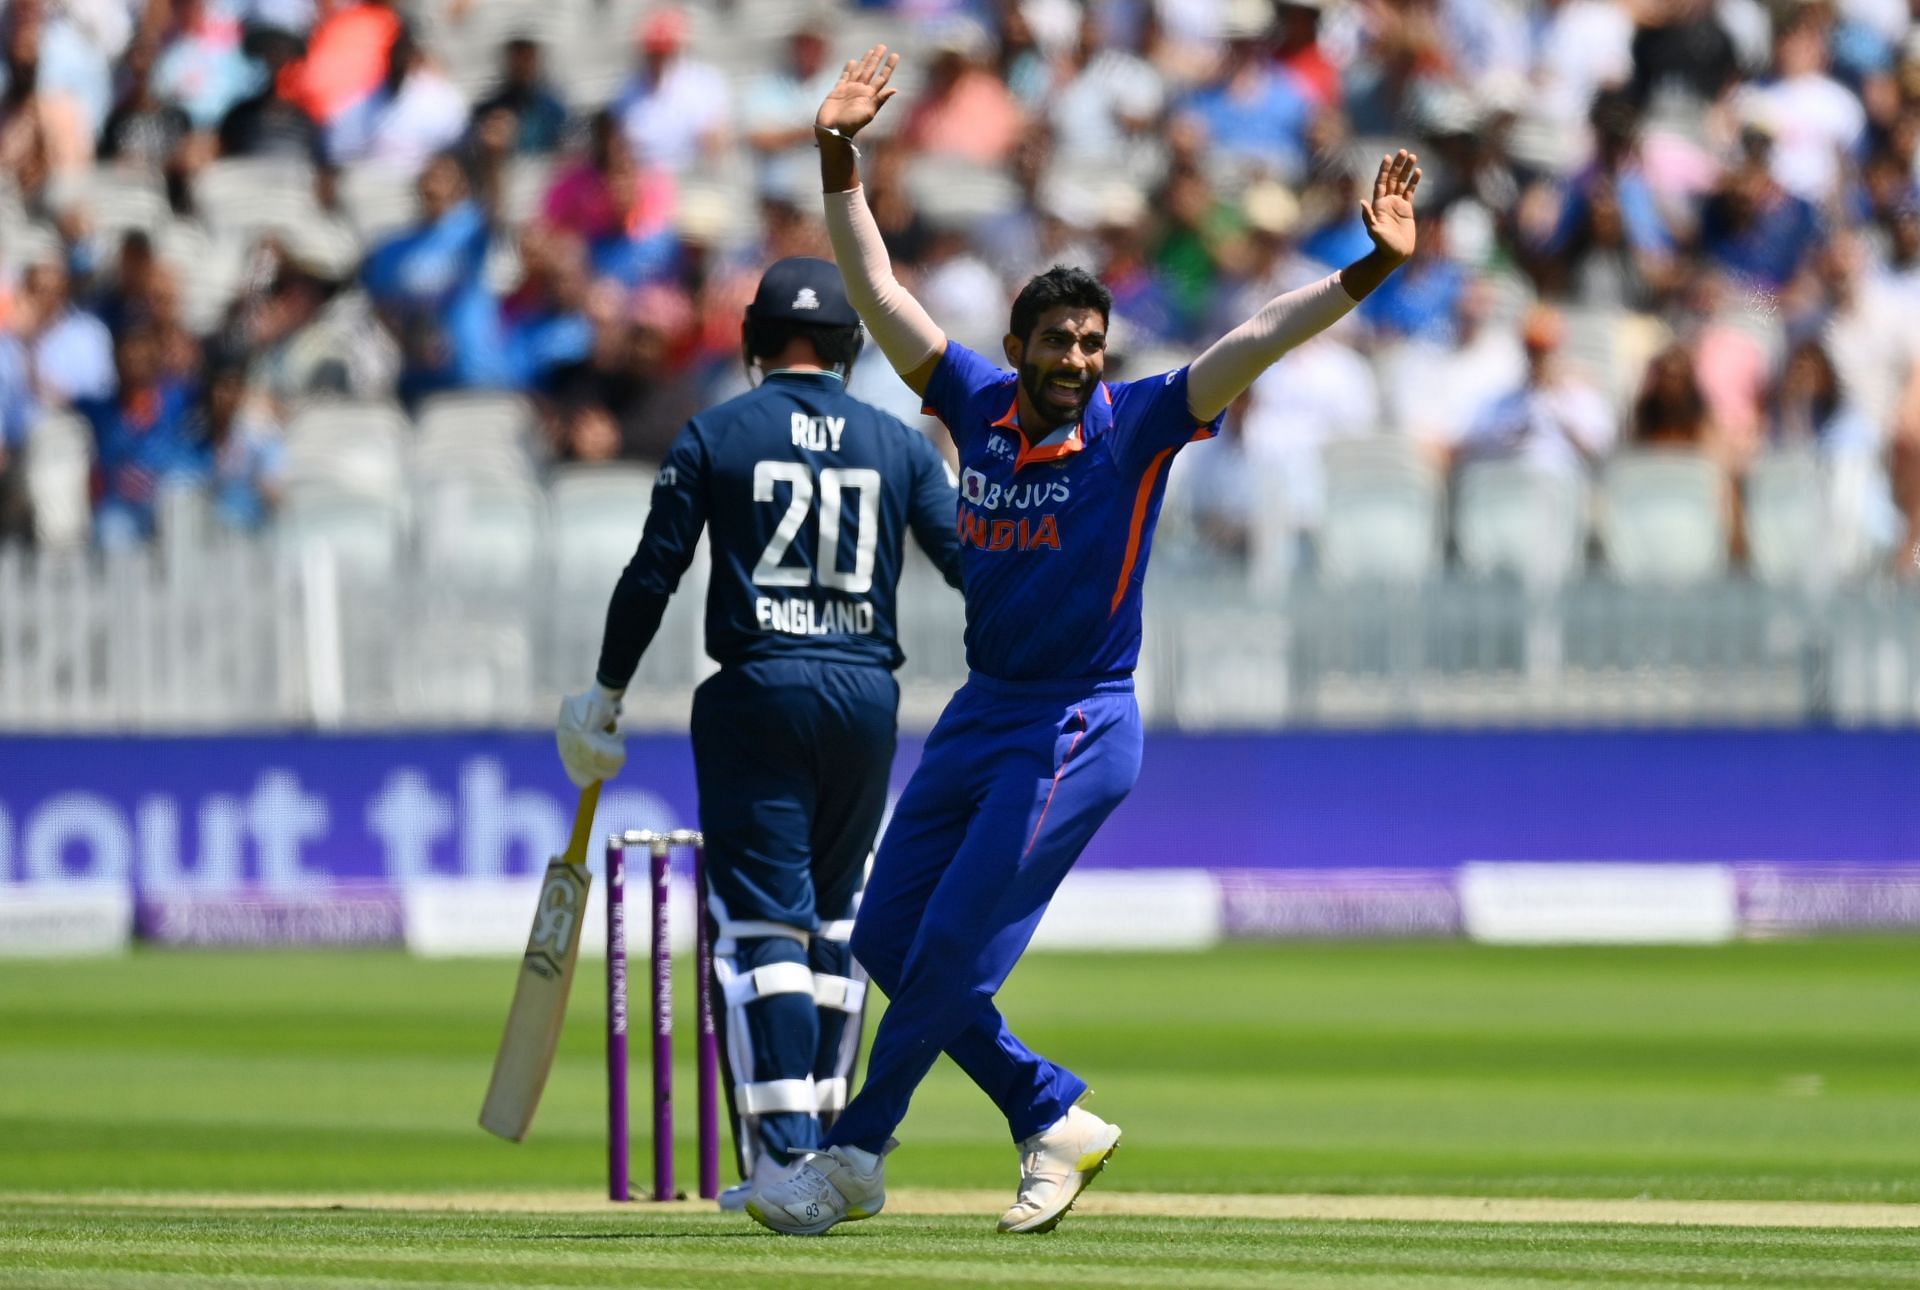 Pacer Jasprit Bumrah during the one-day series in England. Pic: Getty Images